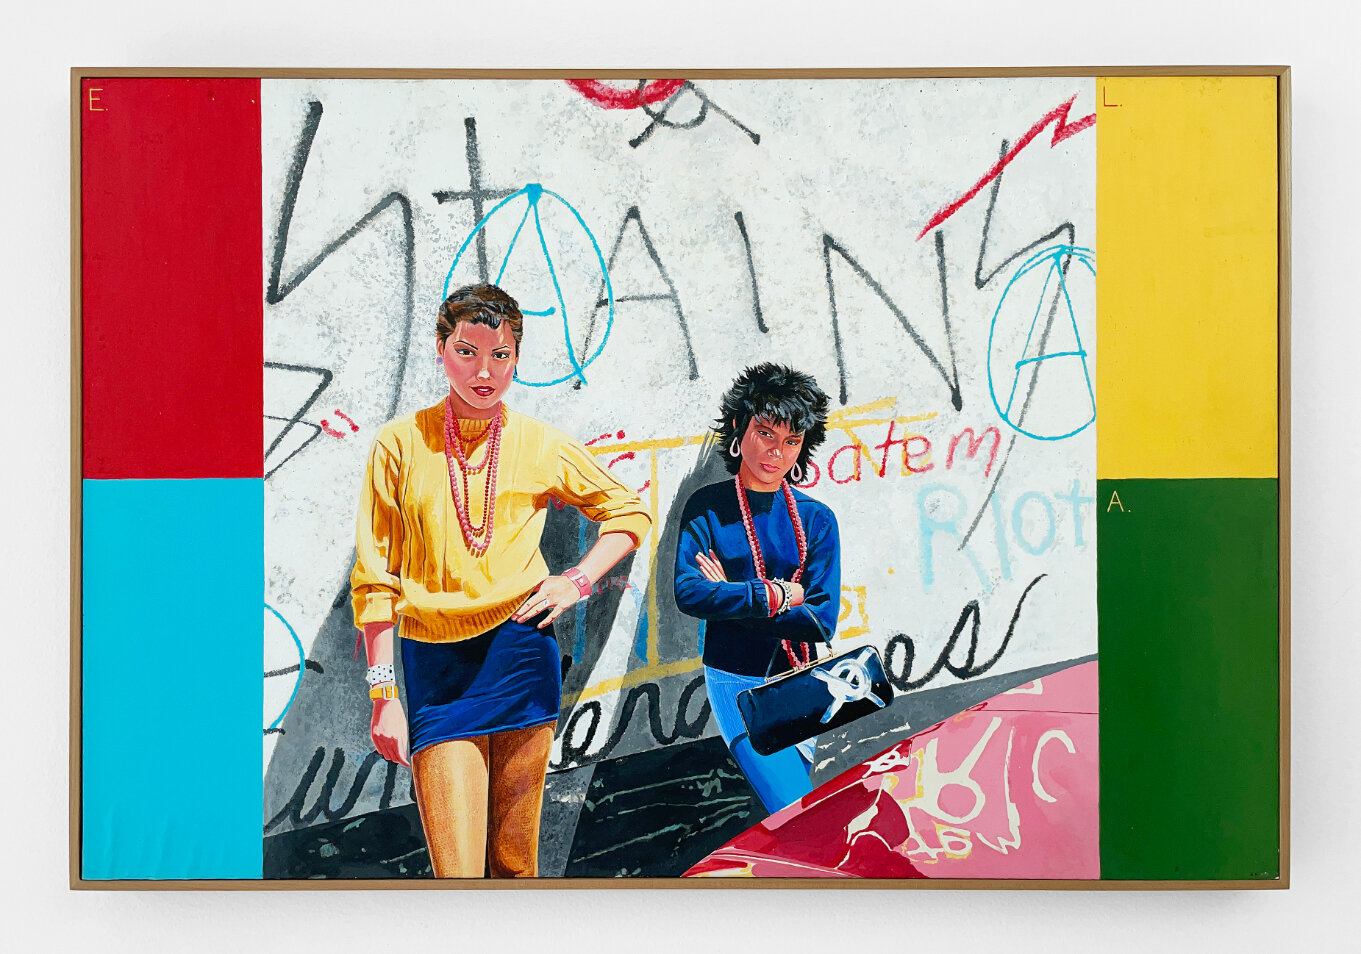  “Rochelle and Sandy”, 1980, acrylic on board, mounted on panel, 20.75 x 30.5 inches   I met Sandy and Rochelle when X played at Self-Help Graphics in Boyle Heights. I painted them in front of the wall of Brave Dog, a post-punk club that was next to 